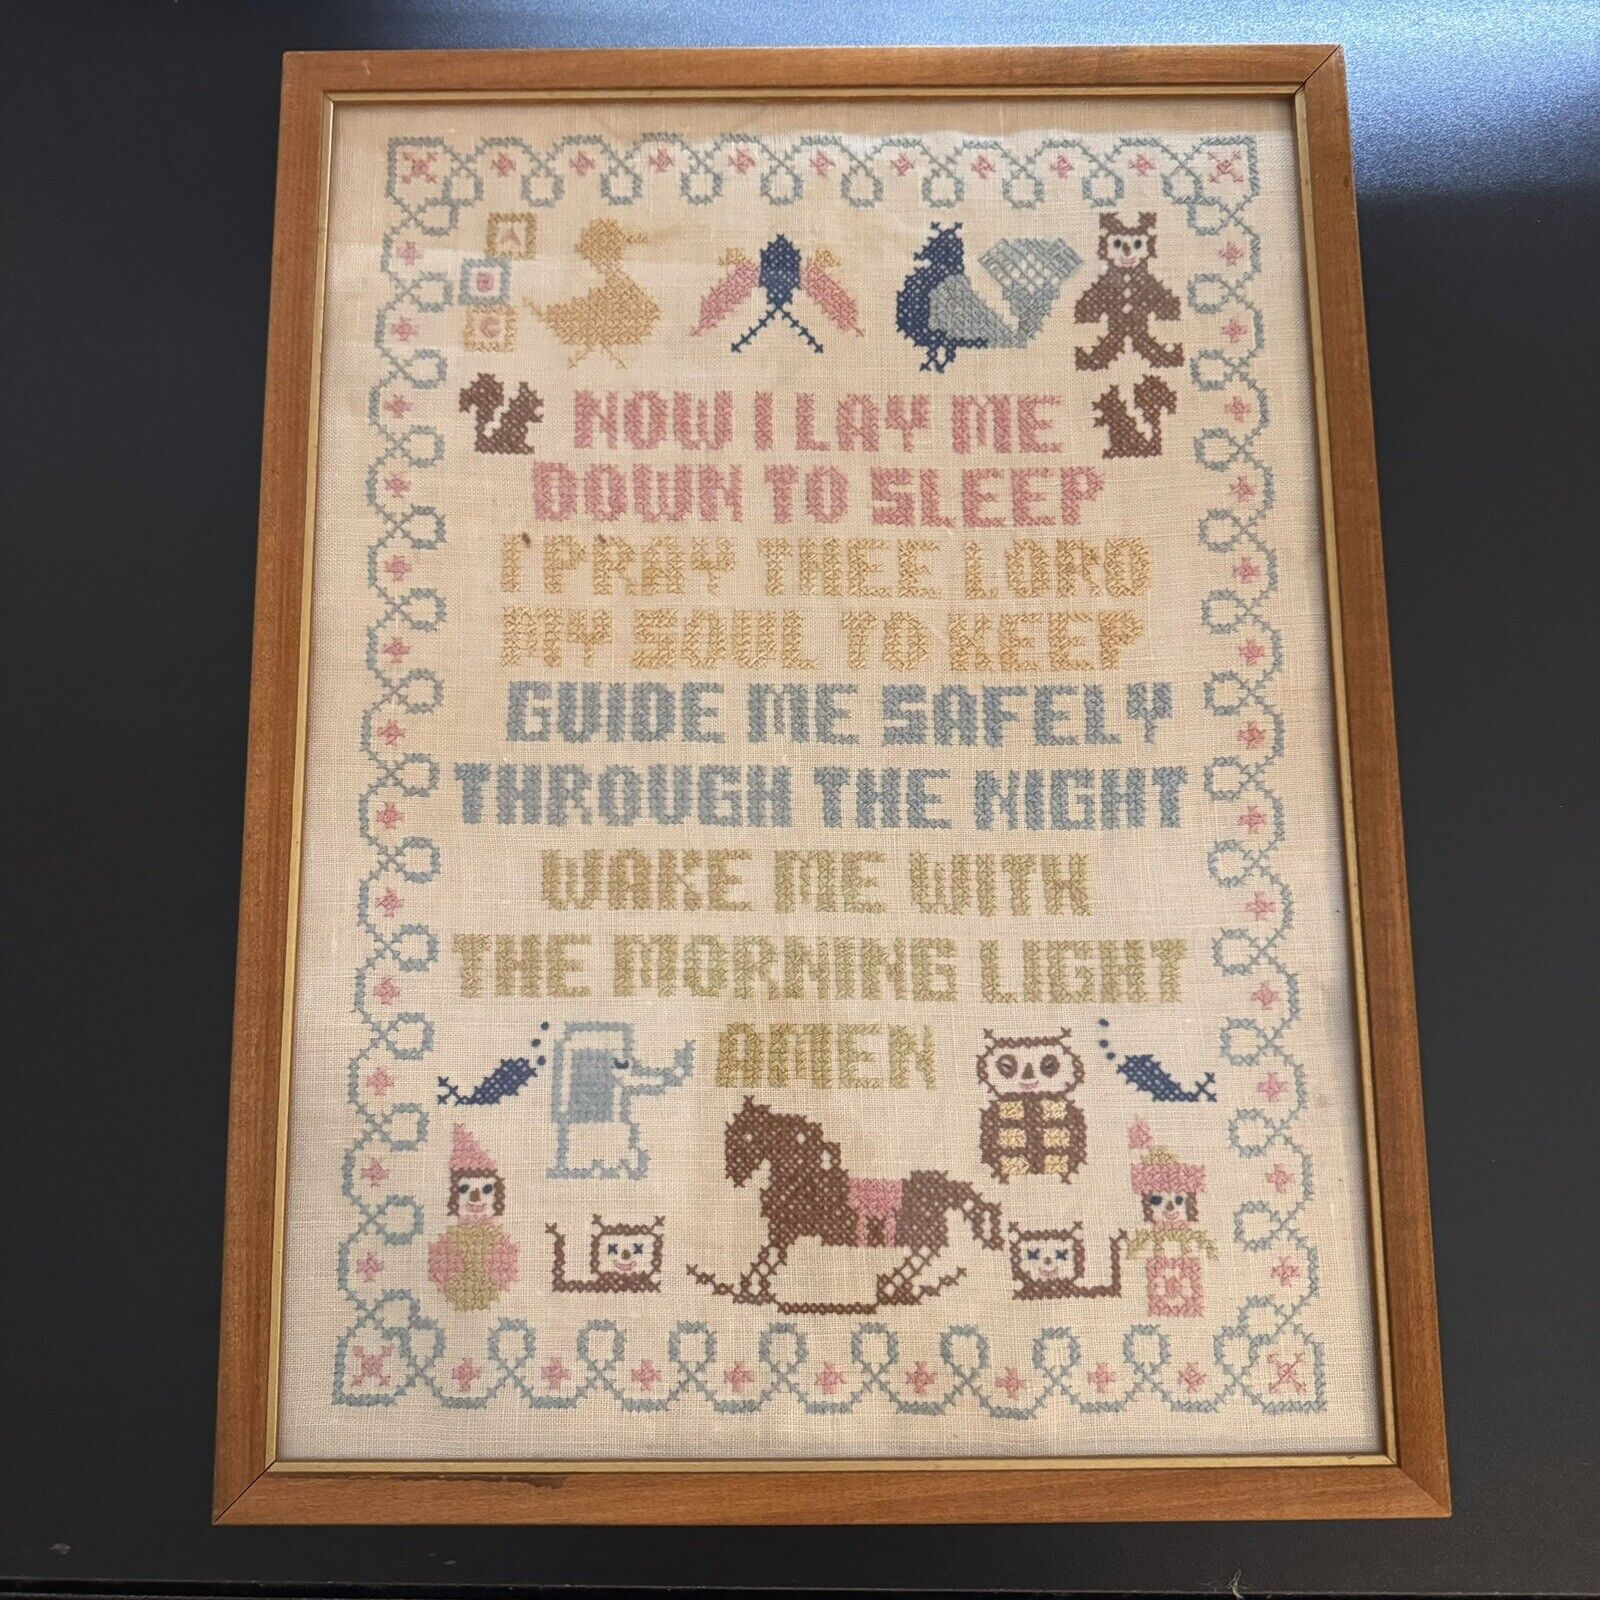 Completed Framed Counted Cross Stitch Nursery Prayer Vintage 16.5” X 12.5”